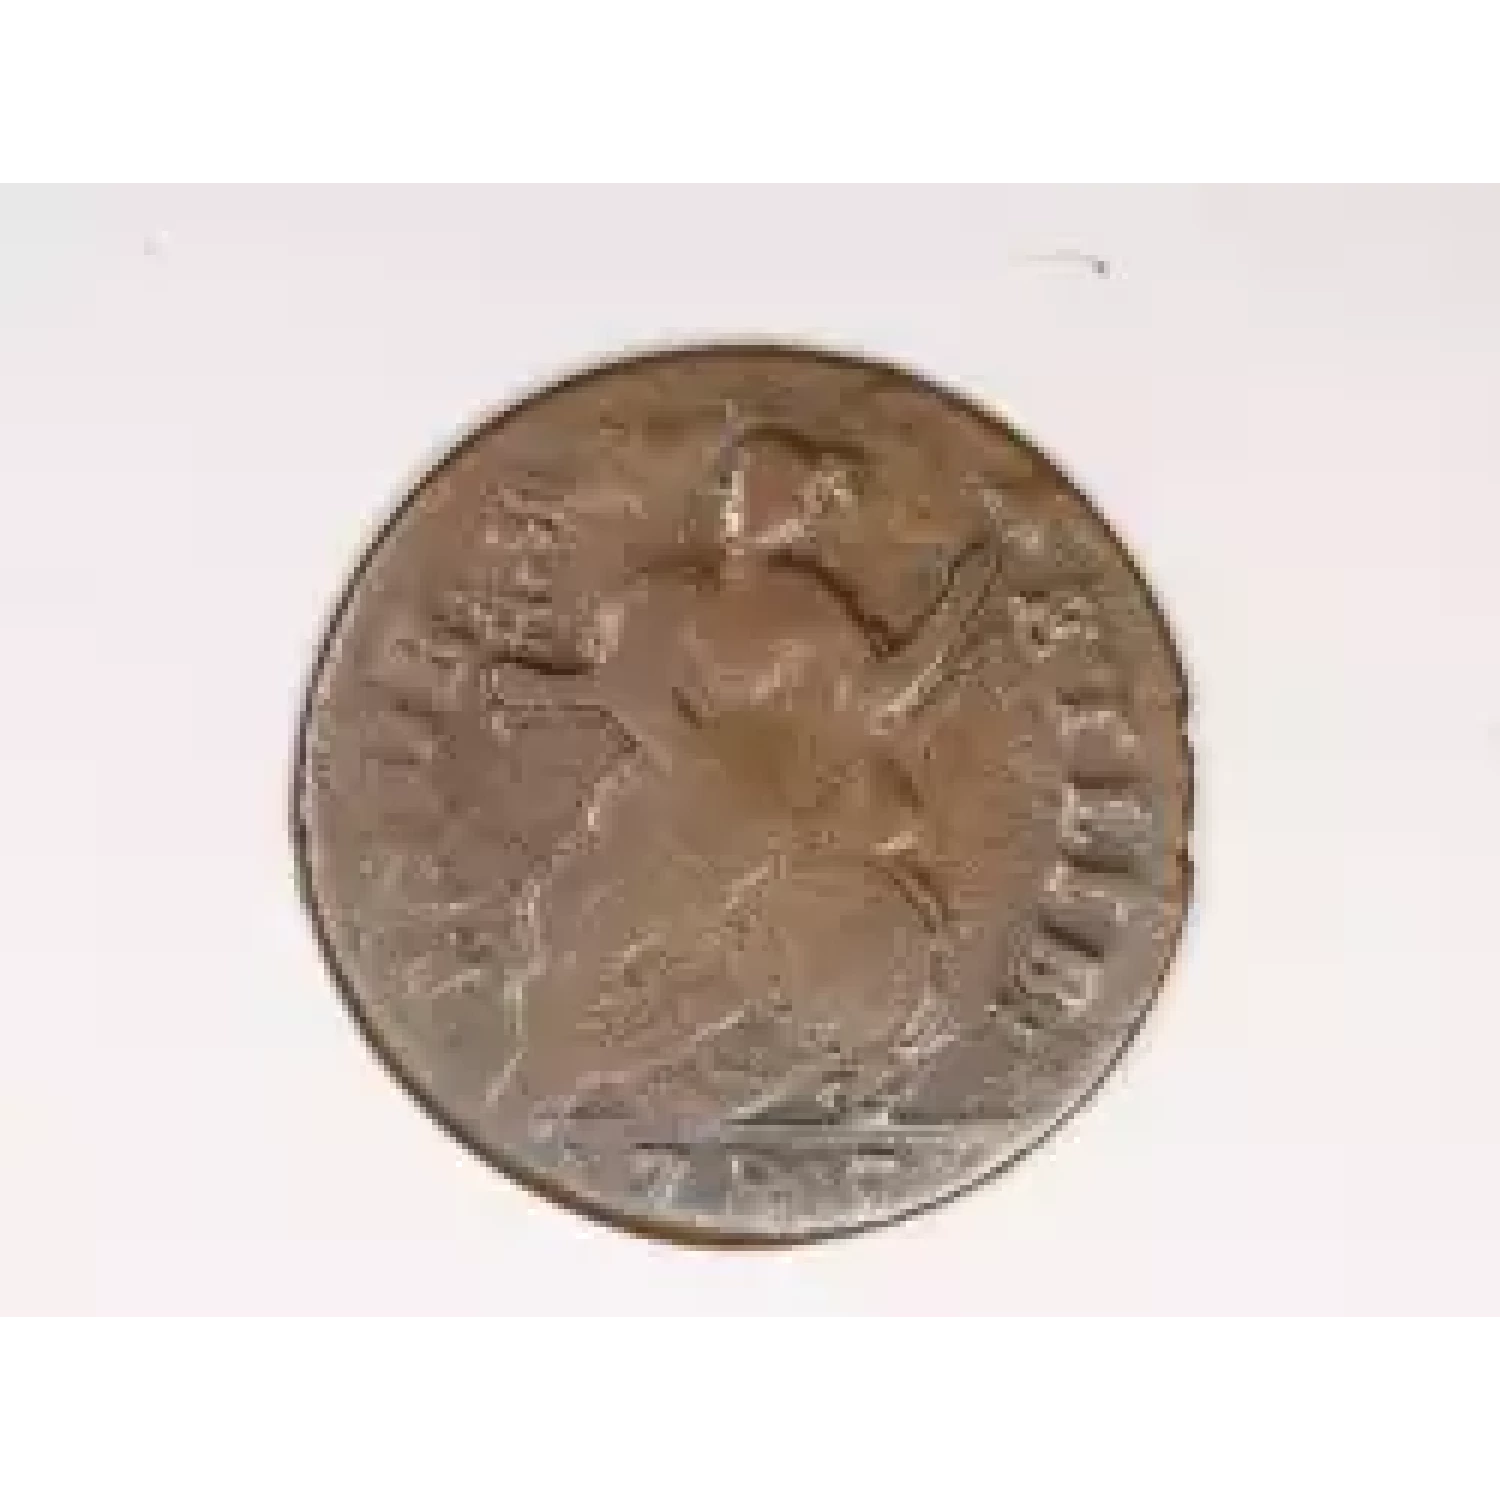 Post Colonial Issues -Coinage of the States-Connecticut -copper (2)